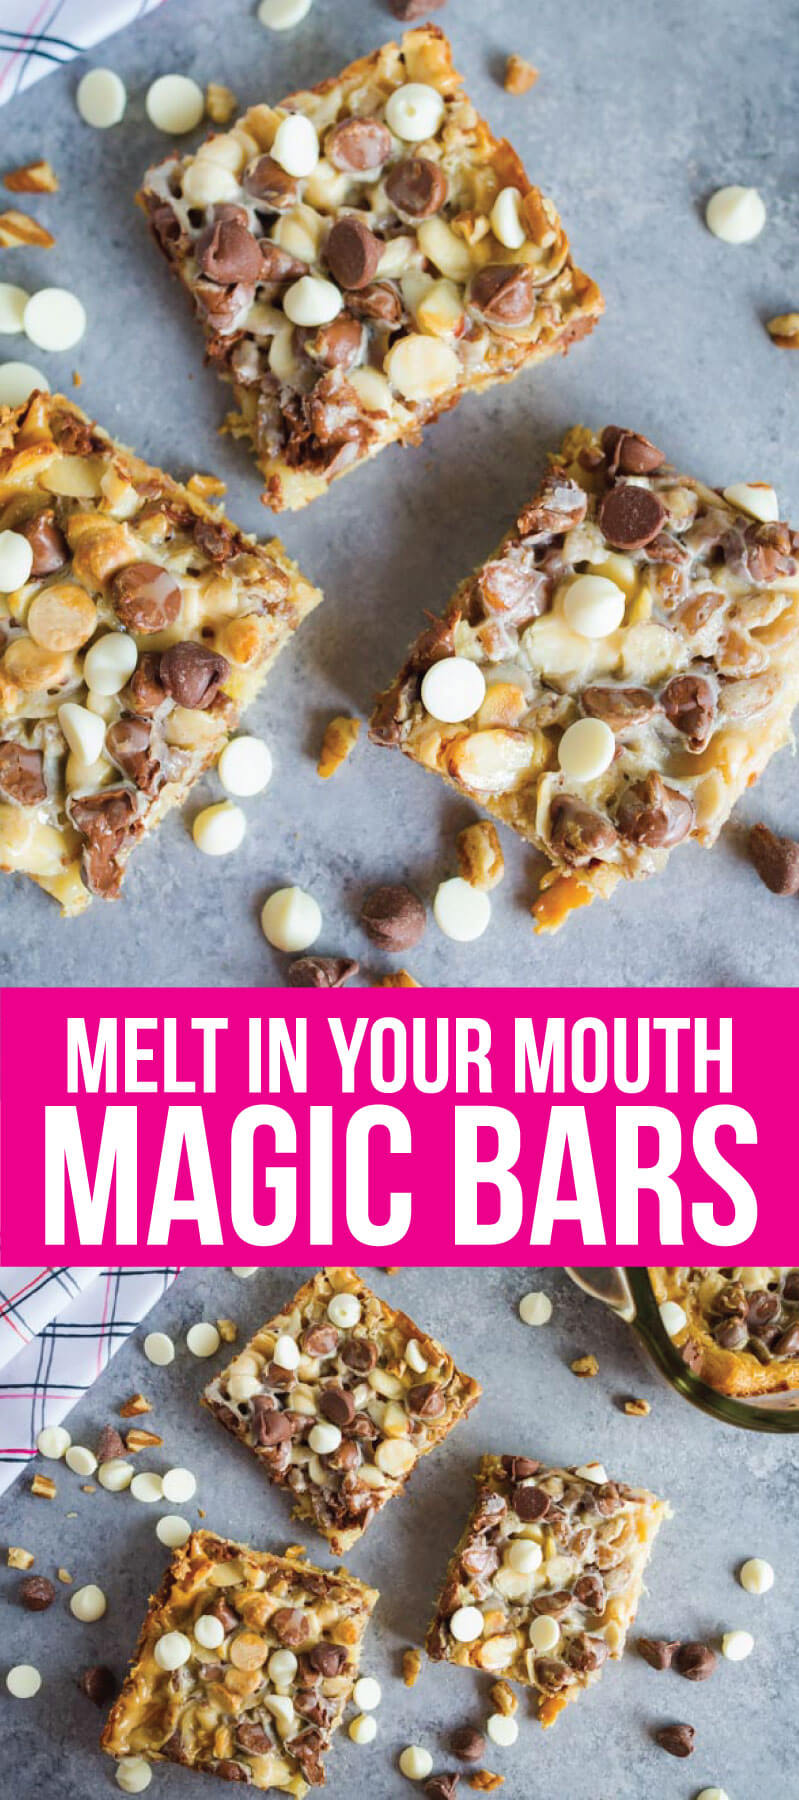 Melt In Your Mouth Magic Bars - you only need a few ingredients to make this amazing dessert. www.thirtyhandmadedays.com